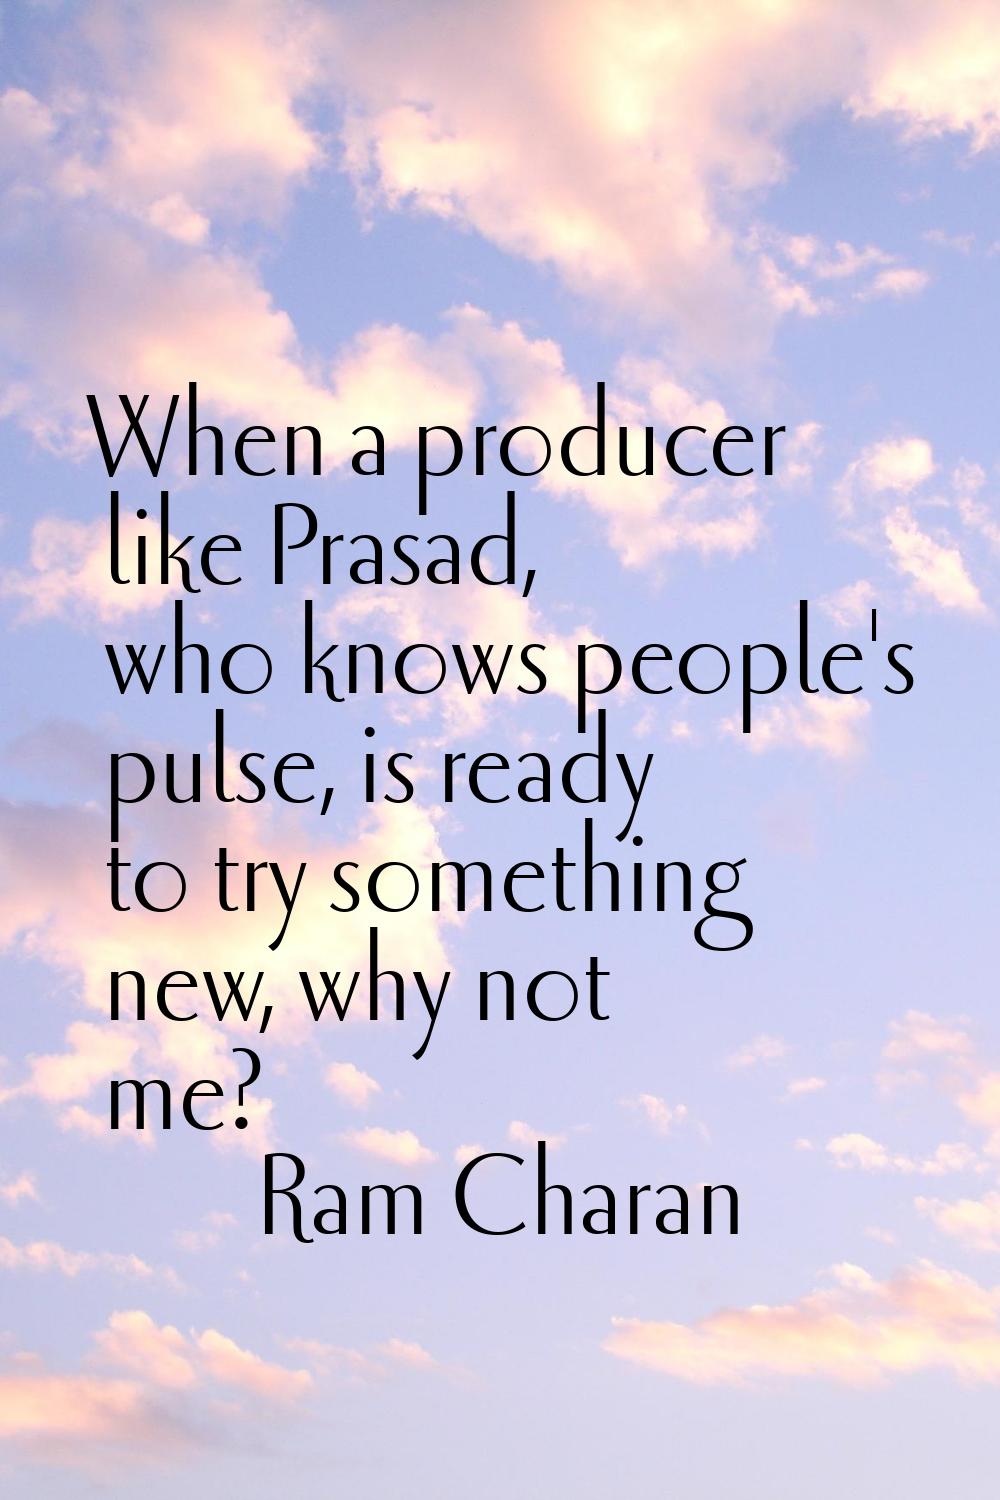 When a producer like Prasad, who knows people's pulse, is ready to try something new, why not me?